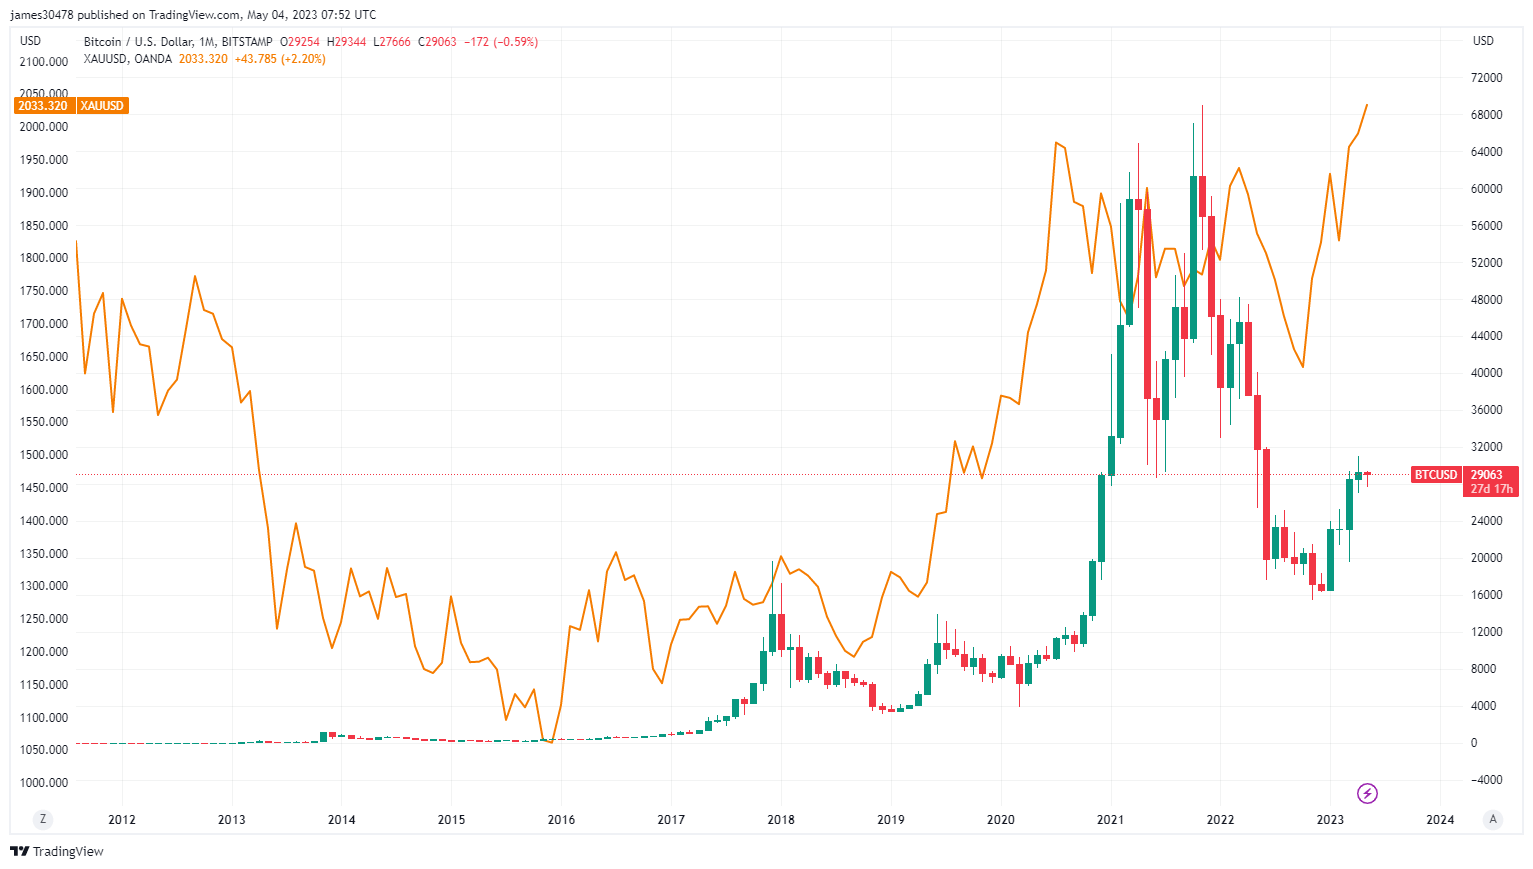 BTC + Gold : (Source: Trading View)